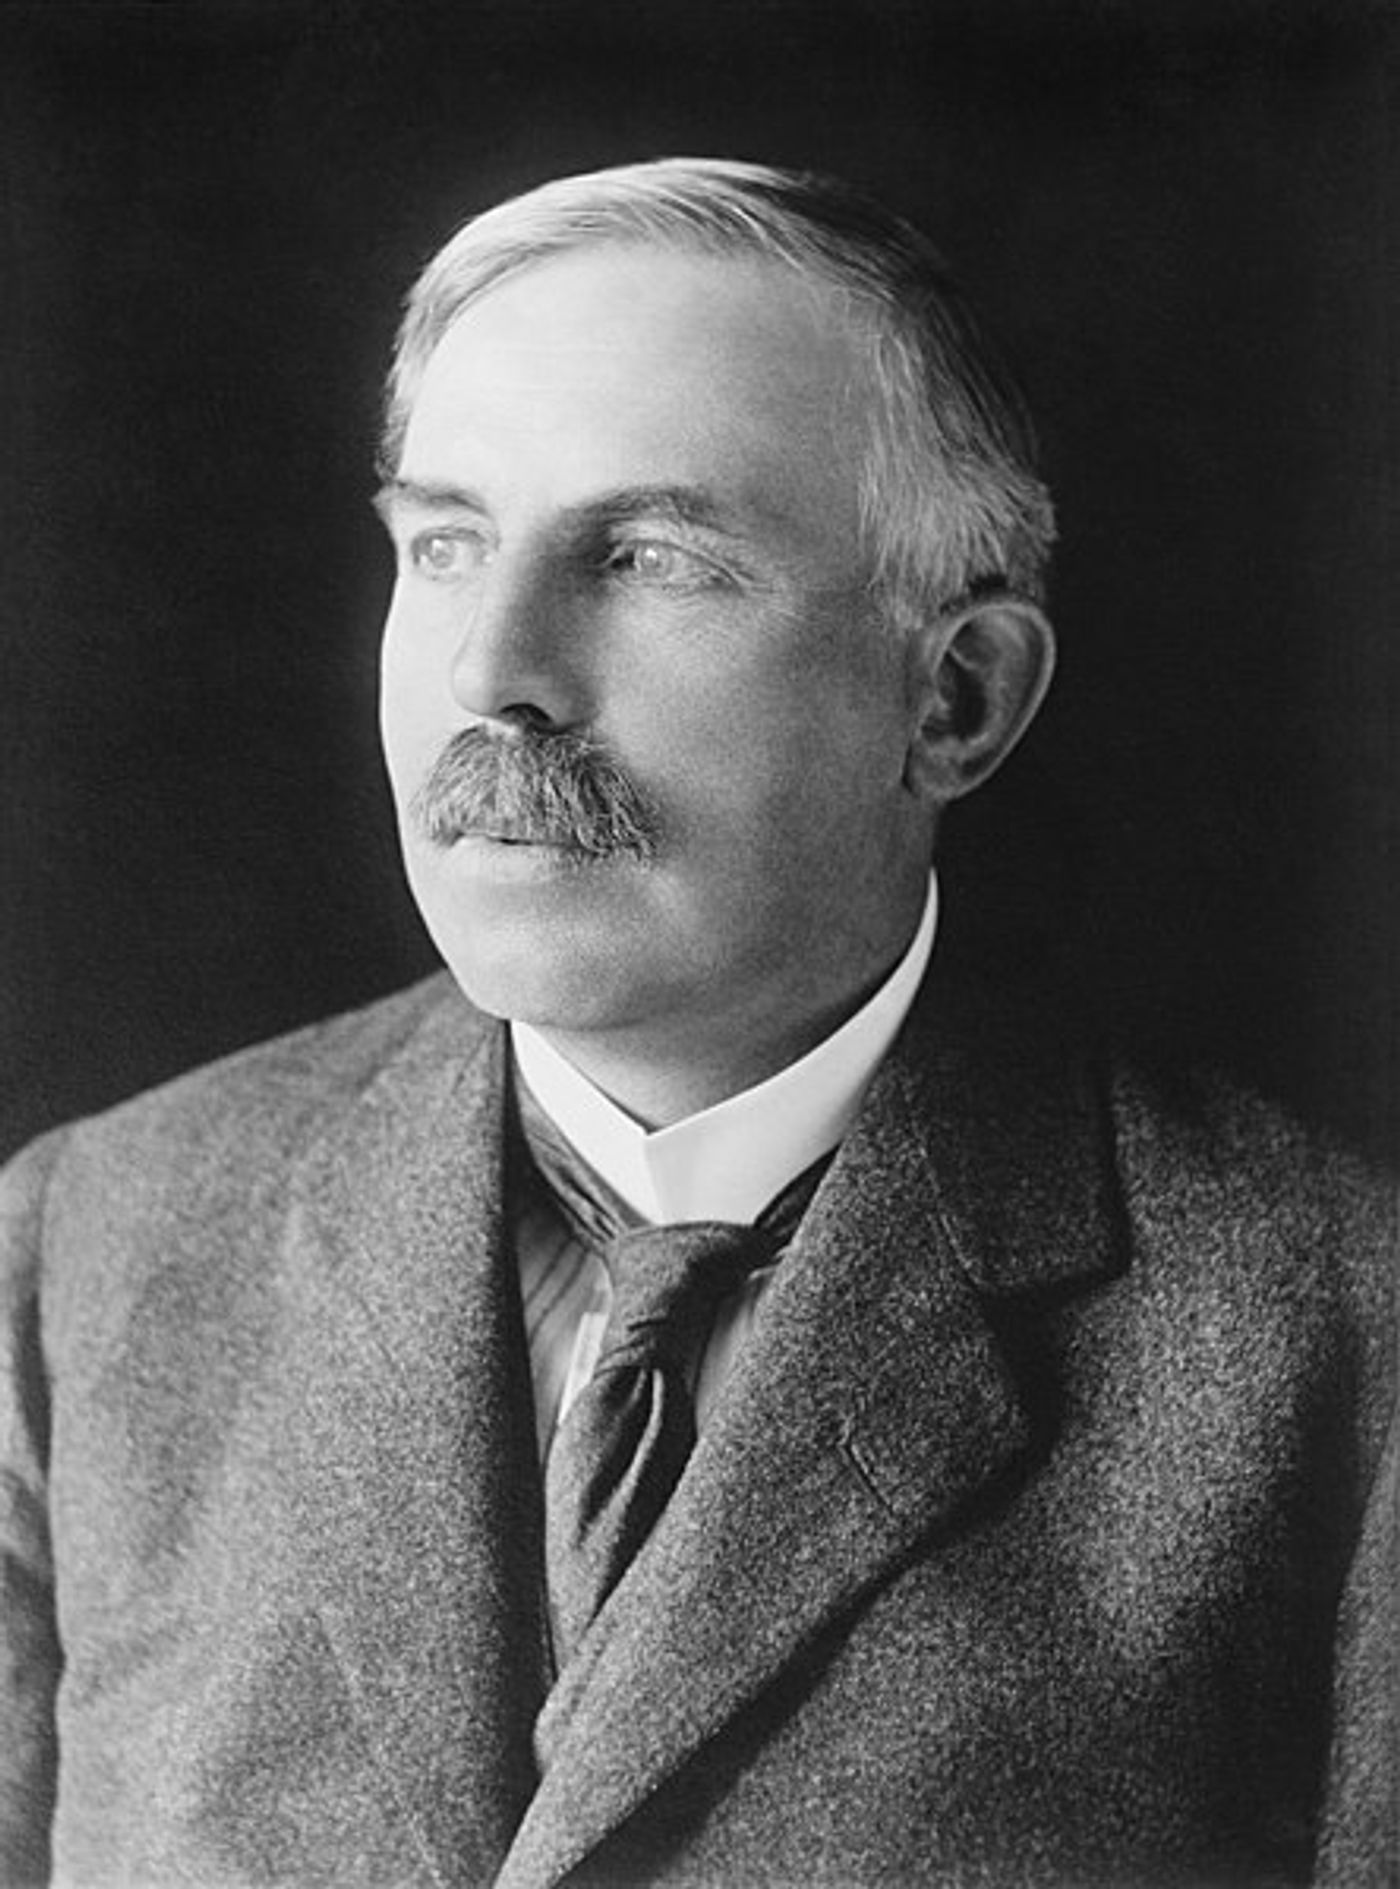 Sir Ernest Rutherford (Credit: Library of Congress, Prints & Photographs Division, LC-B2- 6101-9 [P&P])